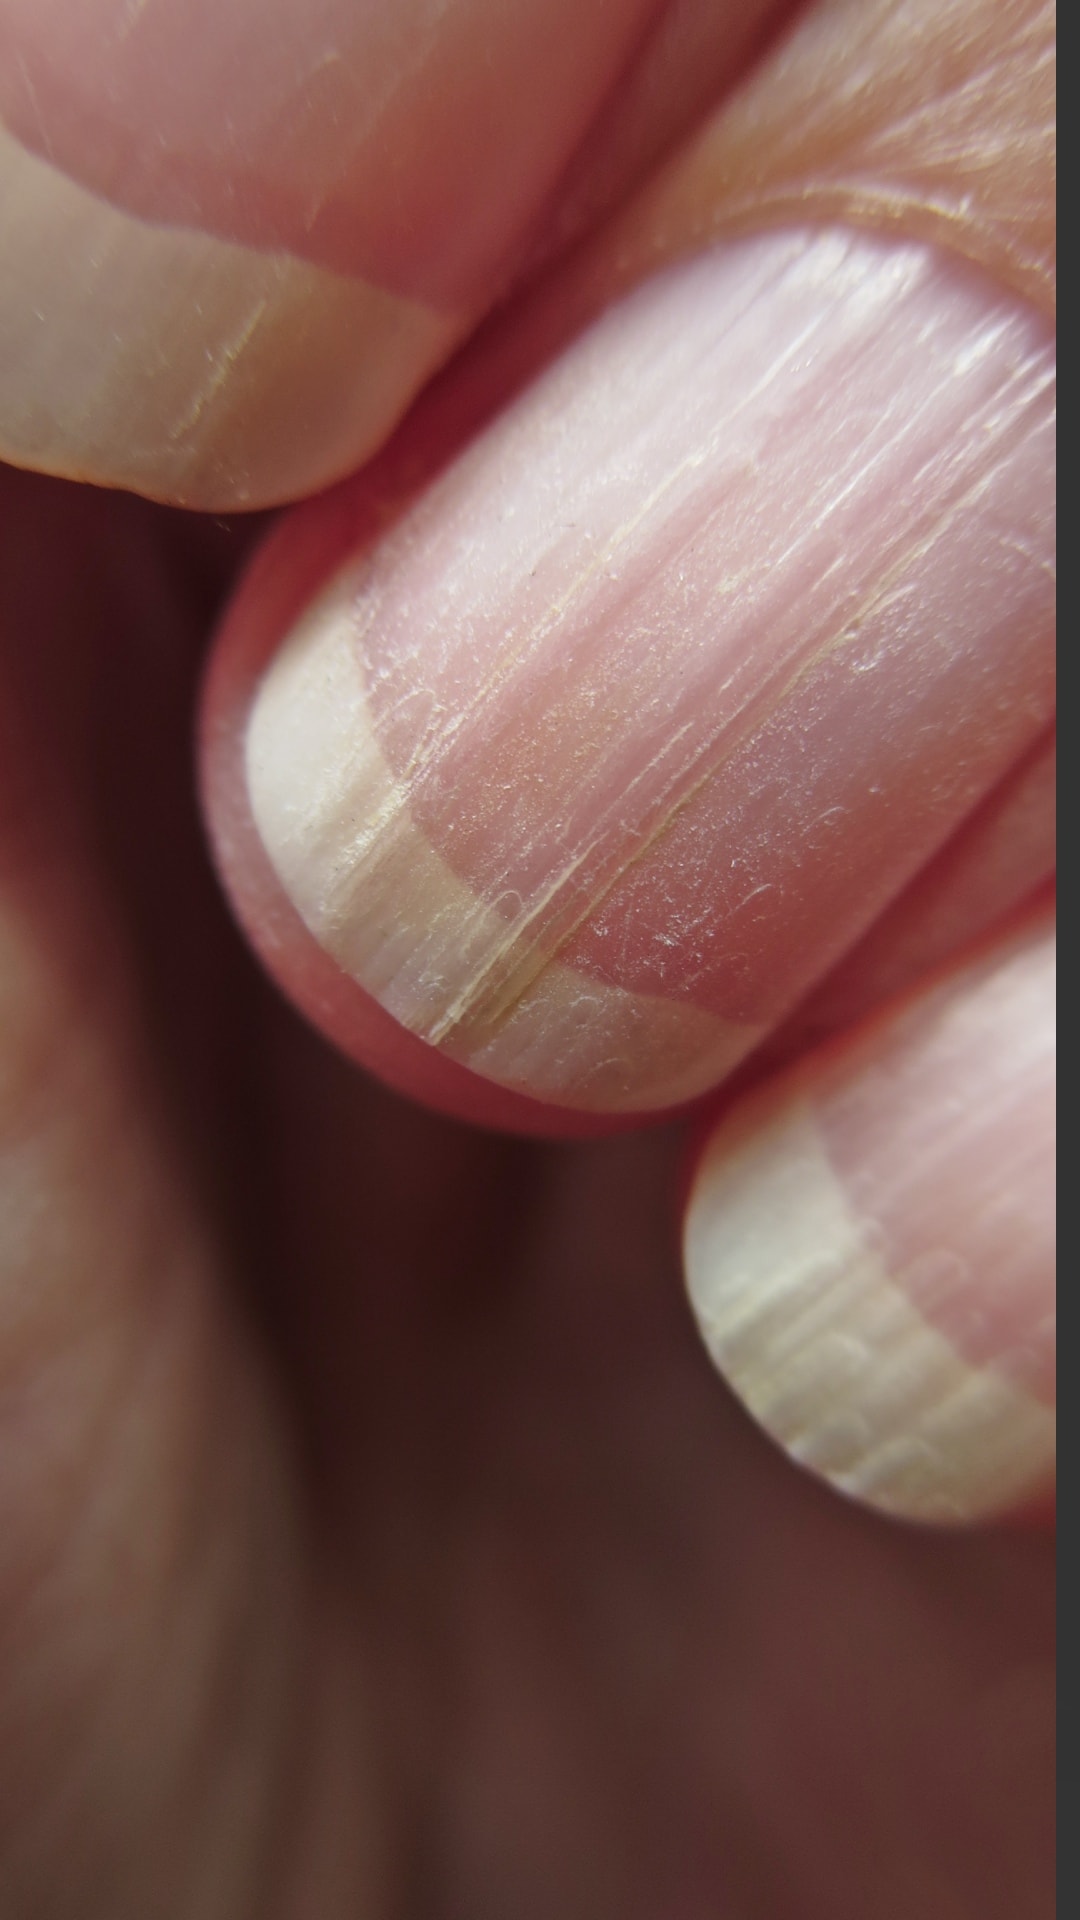 Ridges in Fingernails: Here's What Causes Ridges in Nails - Parade